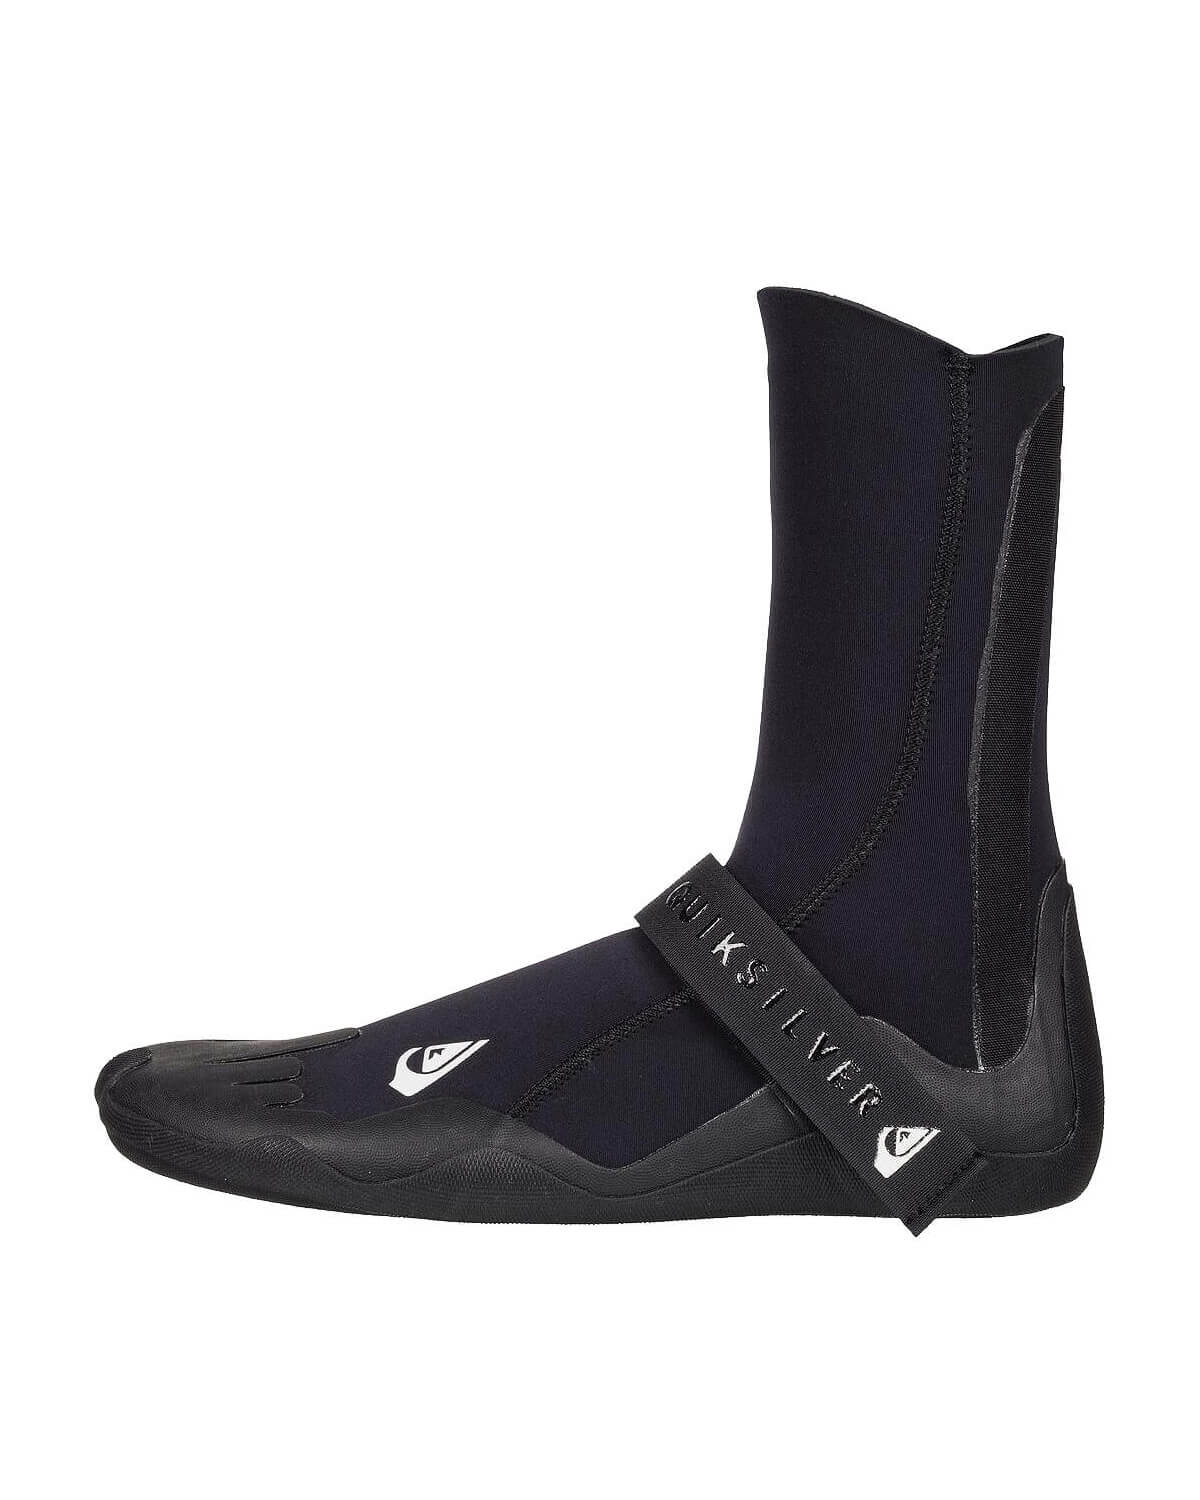 3mm Quiksilver SYNCRO Round Toe Wetsuit Boots